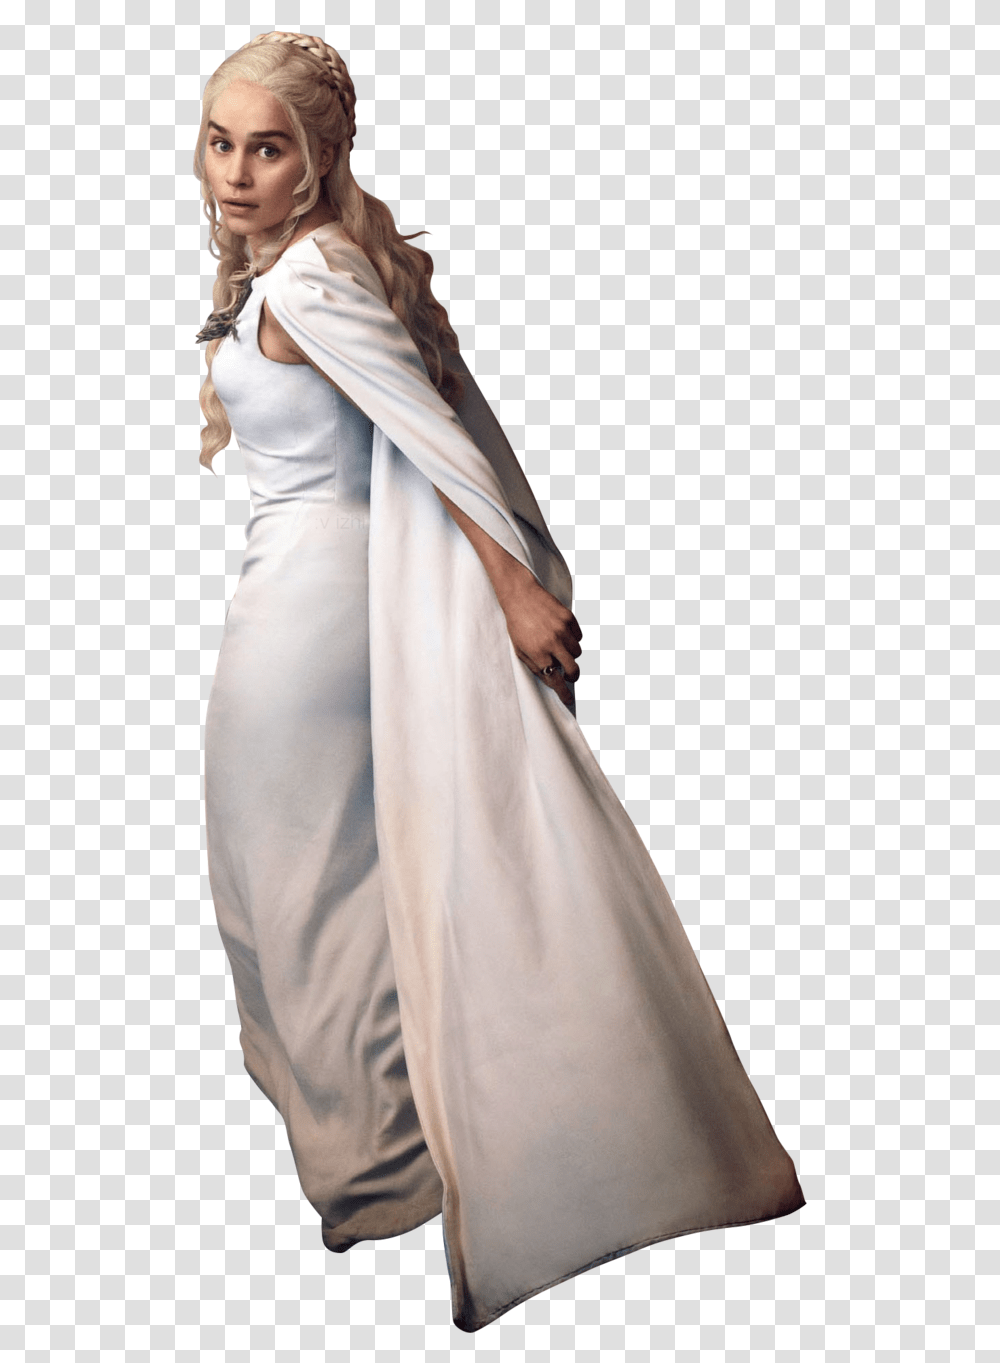 Download Hd Clipart Resolution Game Of Thrones Ew 2019, Clothing, Apparel, Fashion, Robe Transparent Png